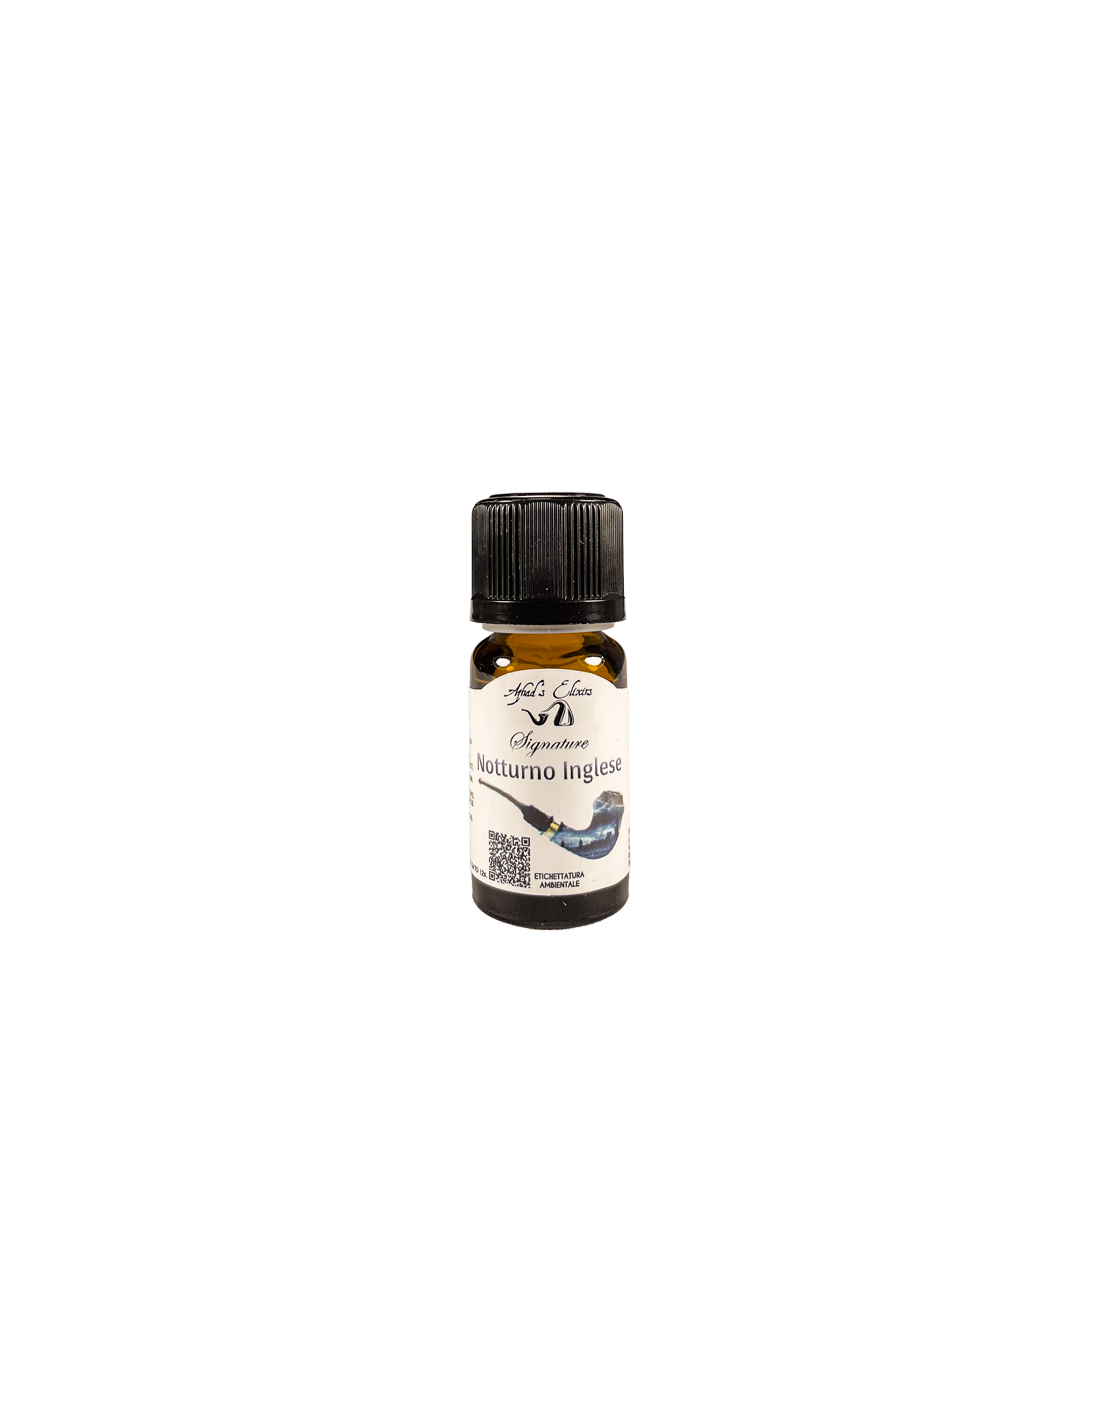 azhad's elixirs notturno inglese aroma concentrato 10ml tabacco english mixture